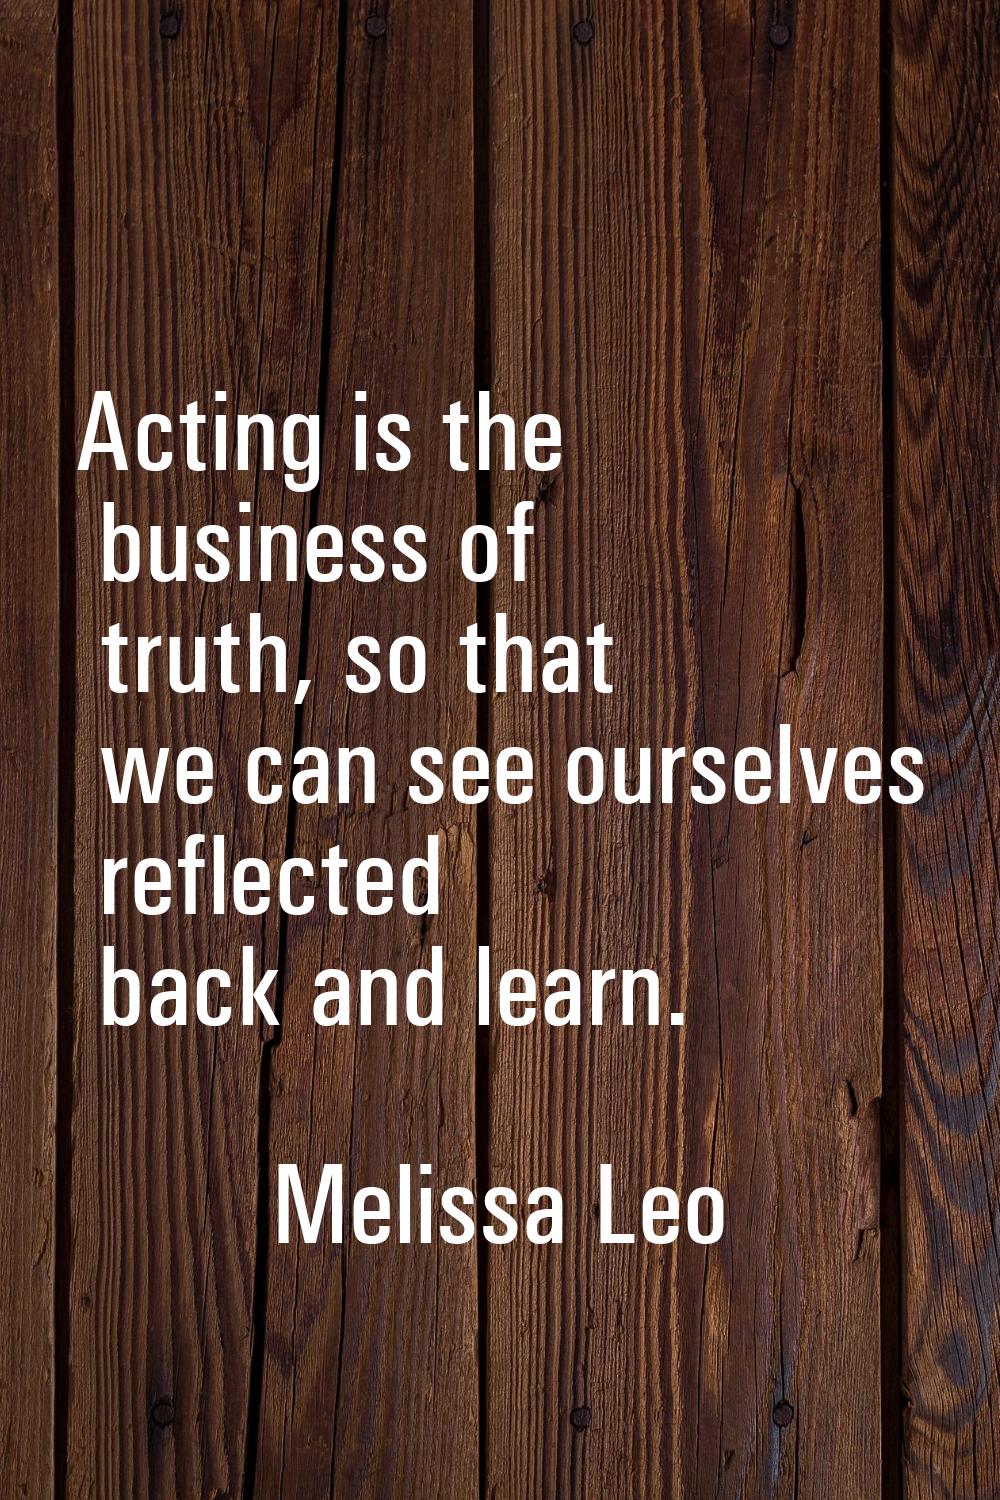 Acting is the business of truth, so that we can see ourselves reflected back and learn.